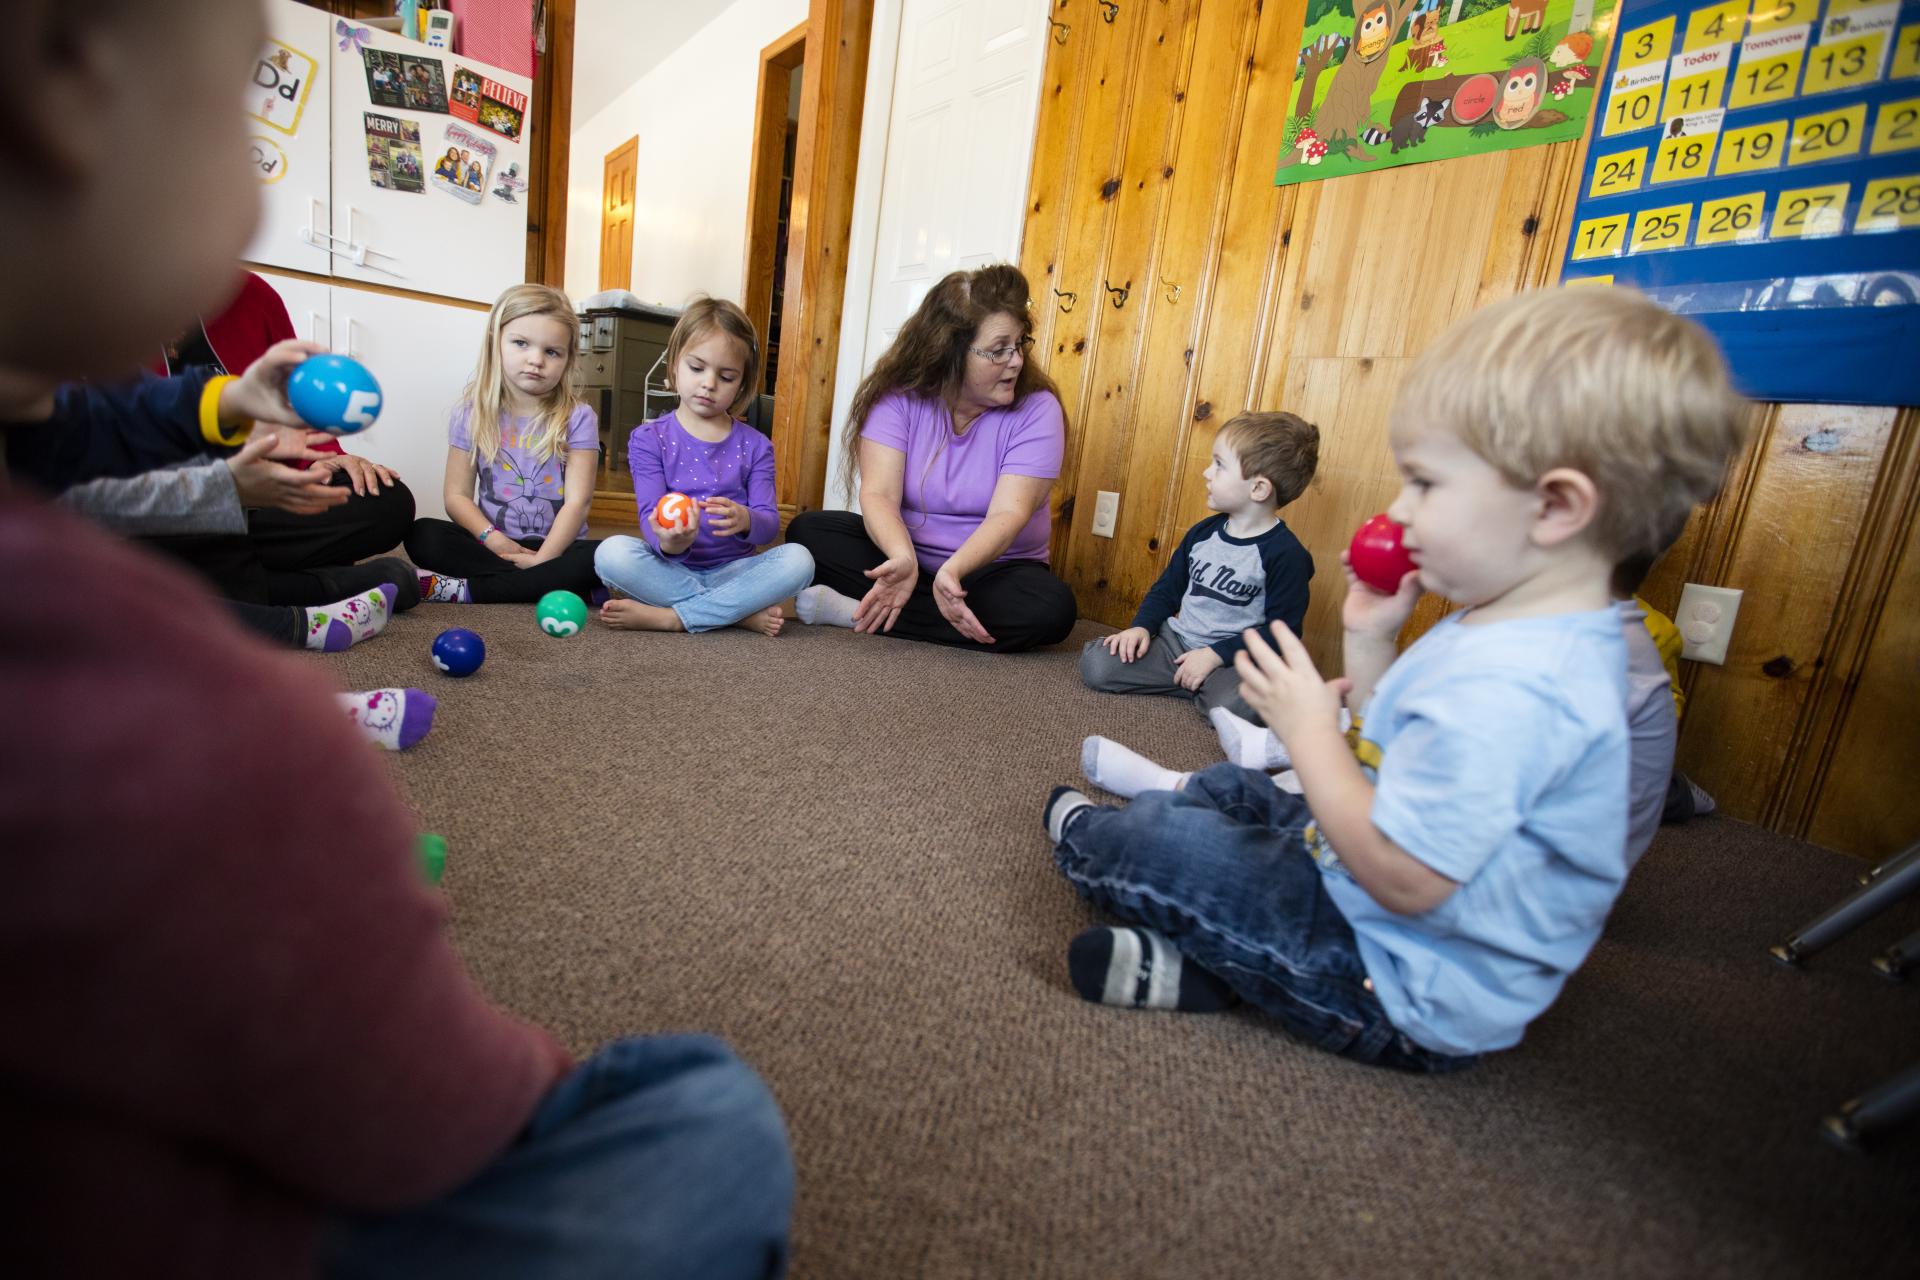 An instructor sitting on the floor with children